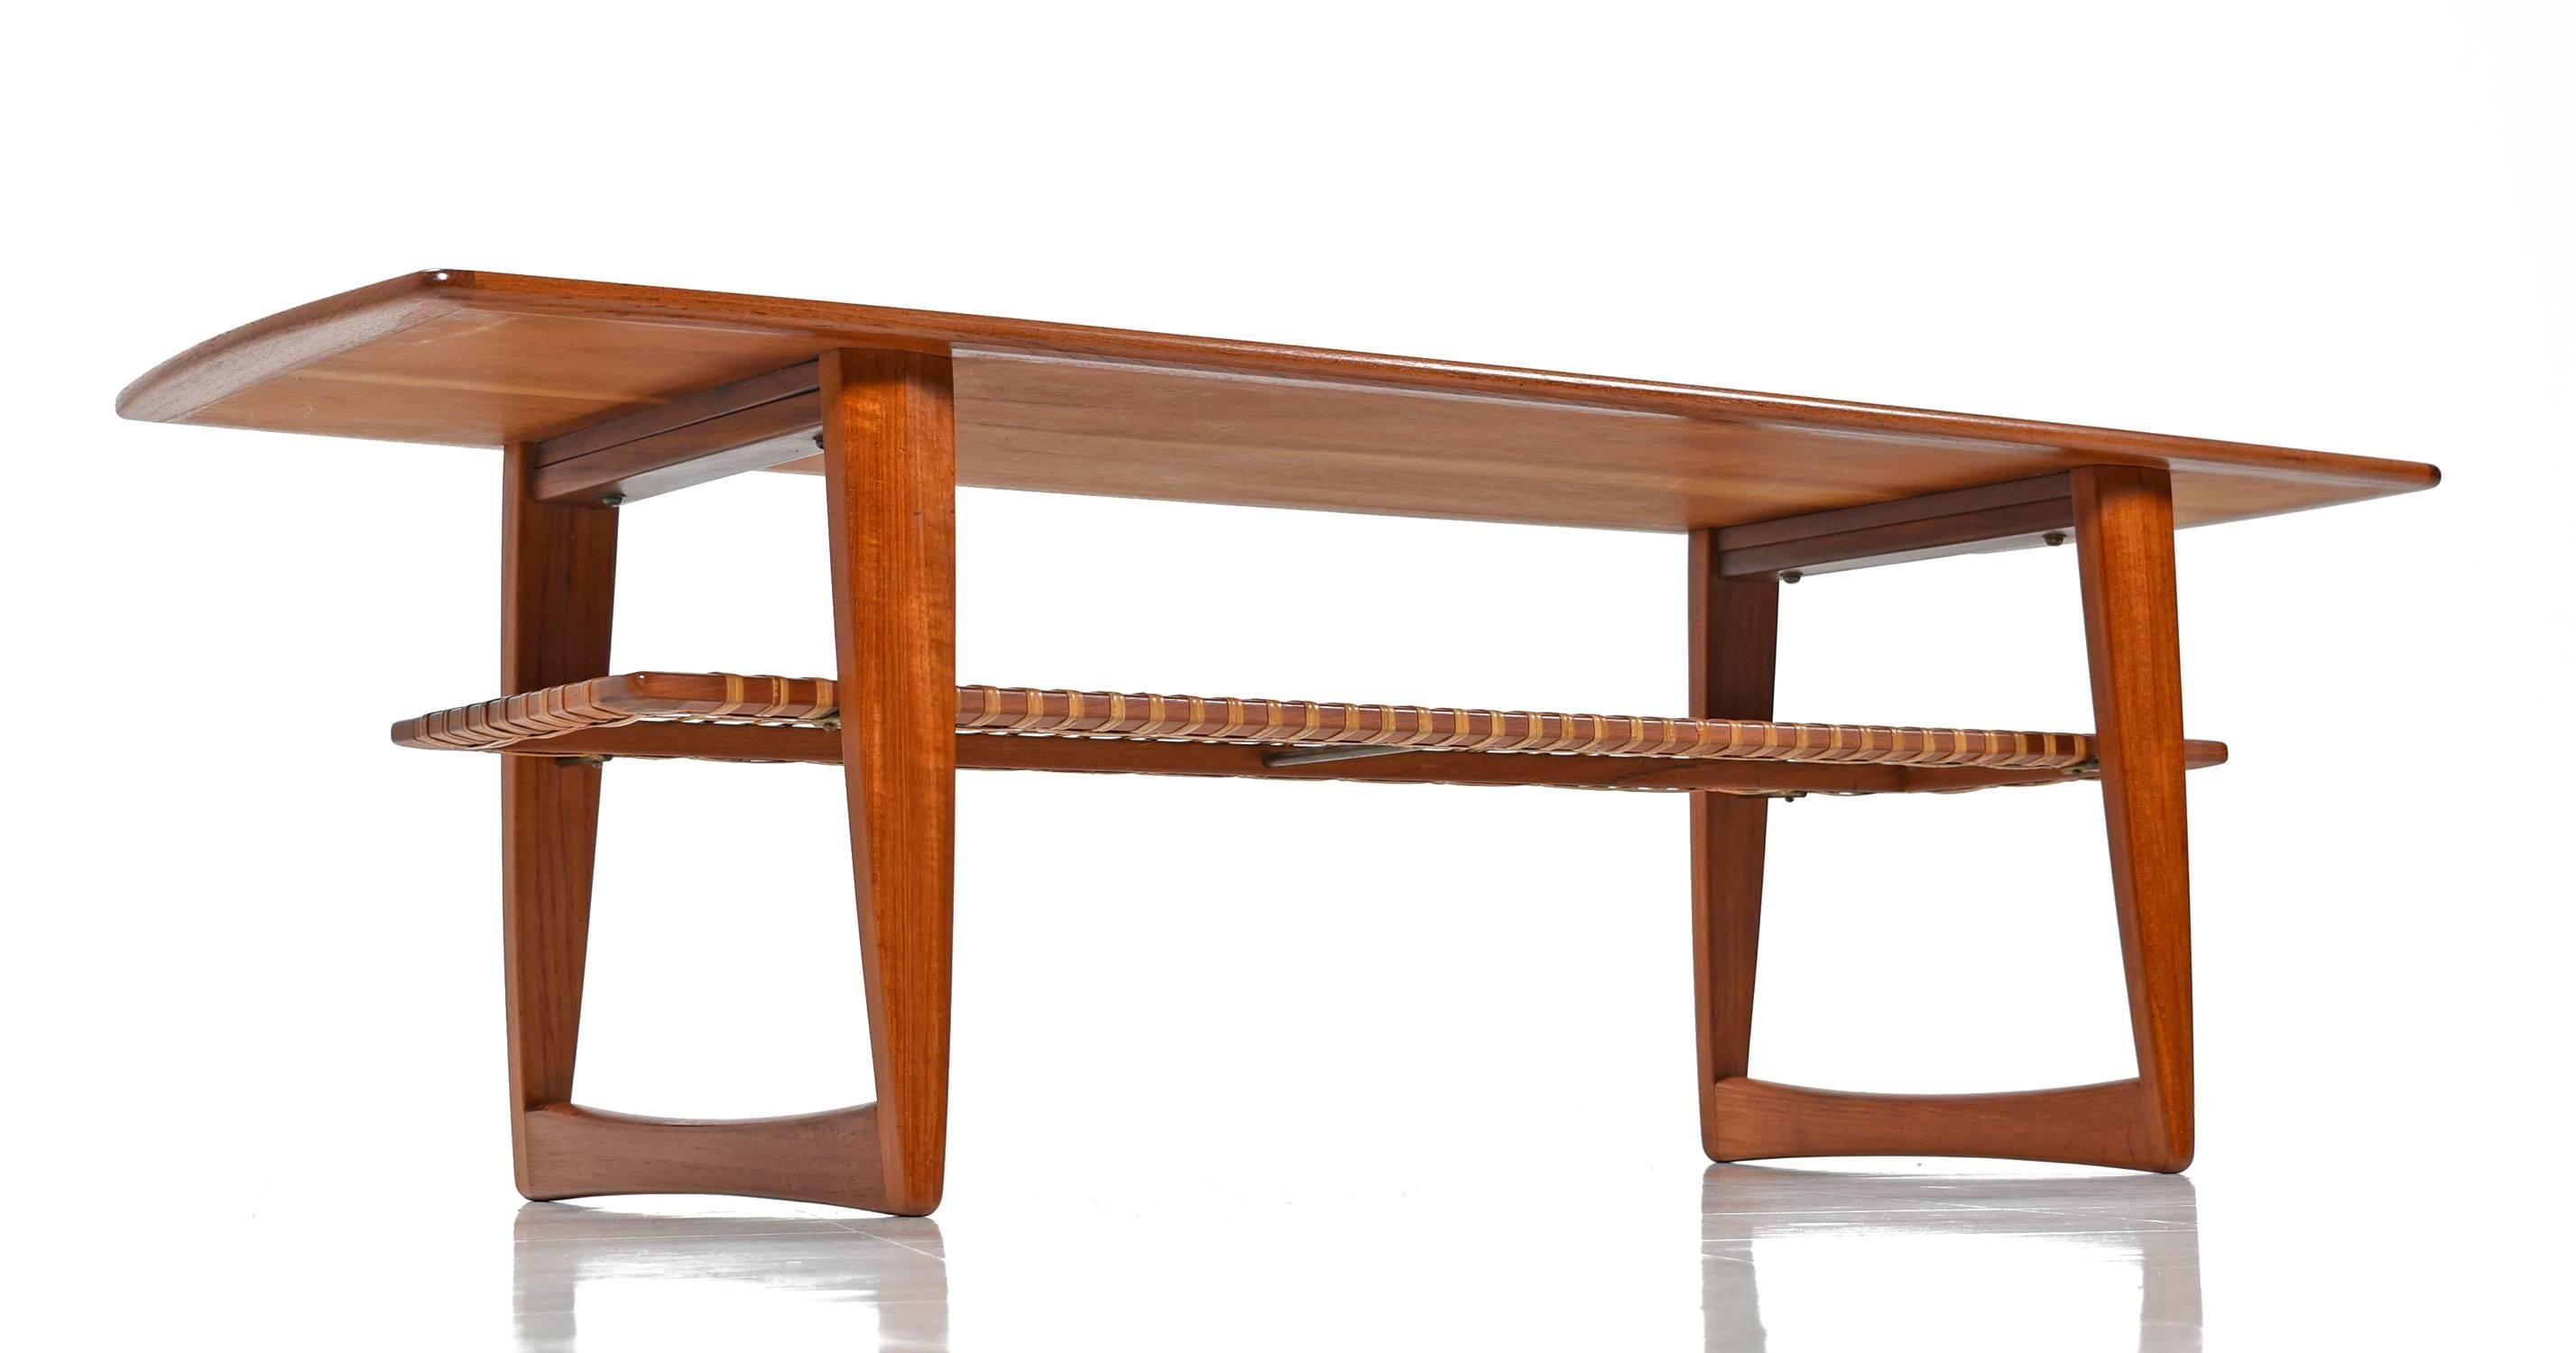 Exquisite vintage 1950s Danish modern coffee table with woven cane shelf beneath the tabletop. This is a remarkable coffee table with a long boat edge tabletop and floating woven shelf. Unusually tall and long, if you need this size, do not pass